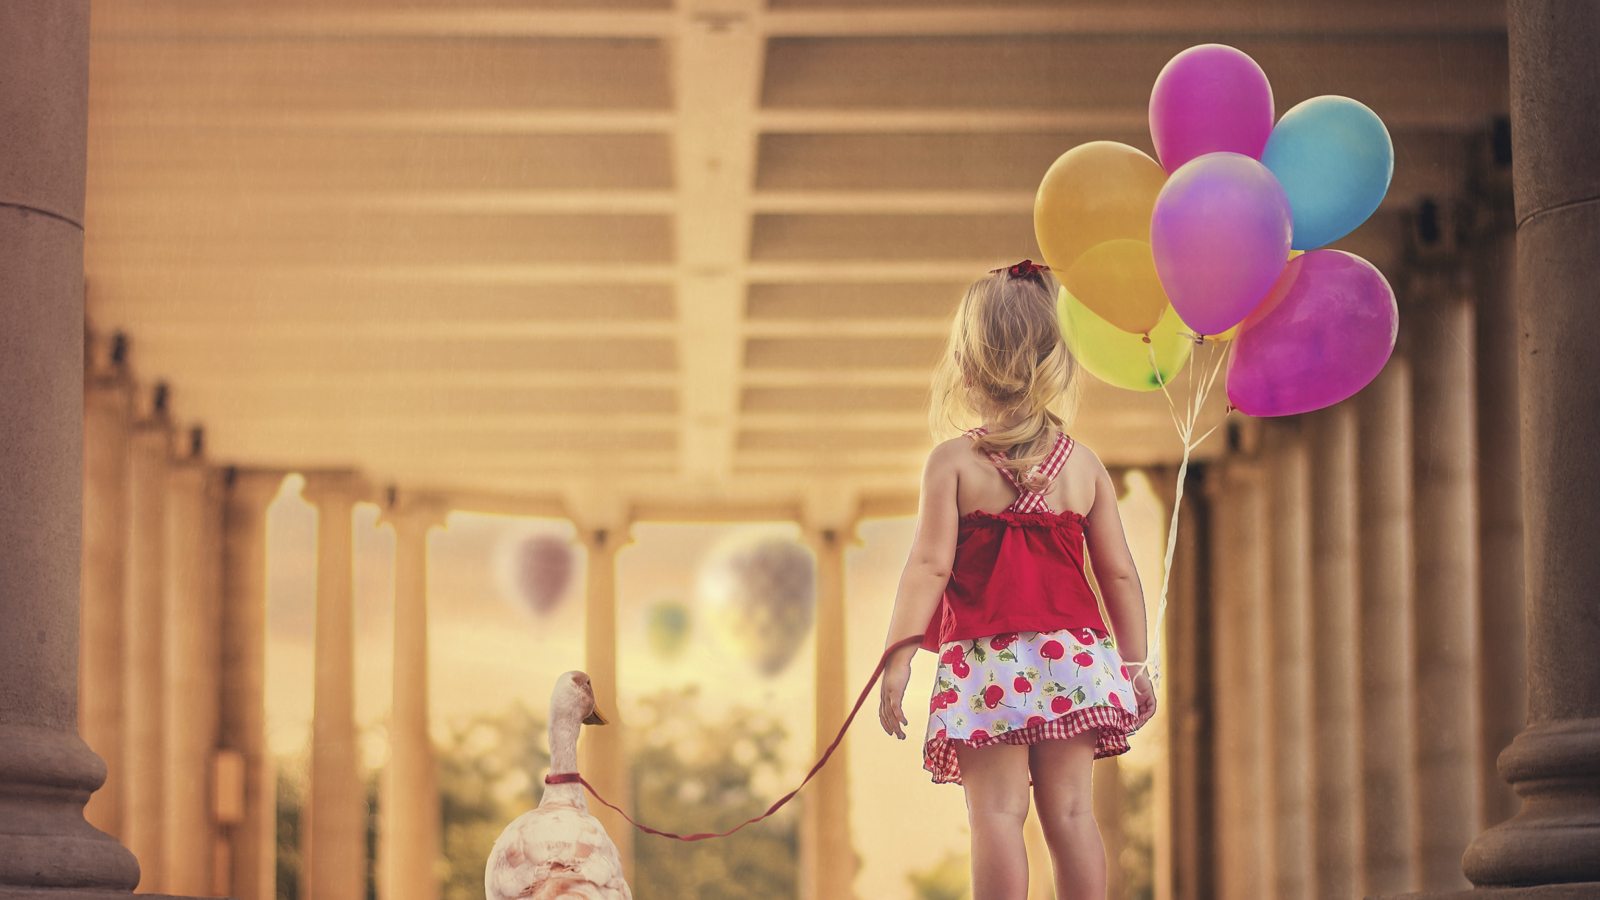 Little Girl With Colorful Balloons wallpaper 1600x900